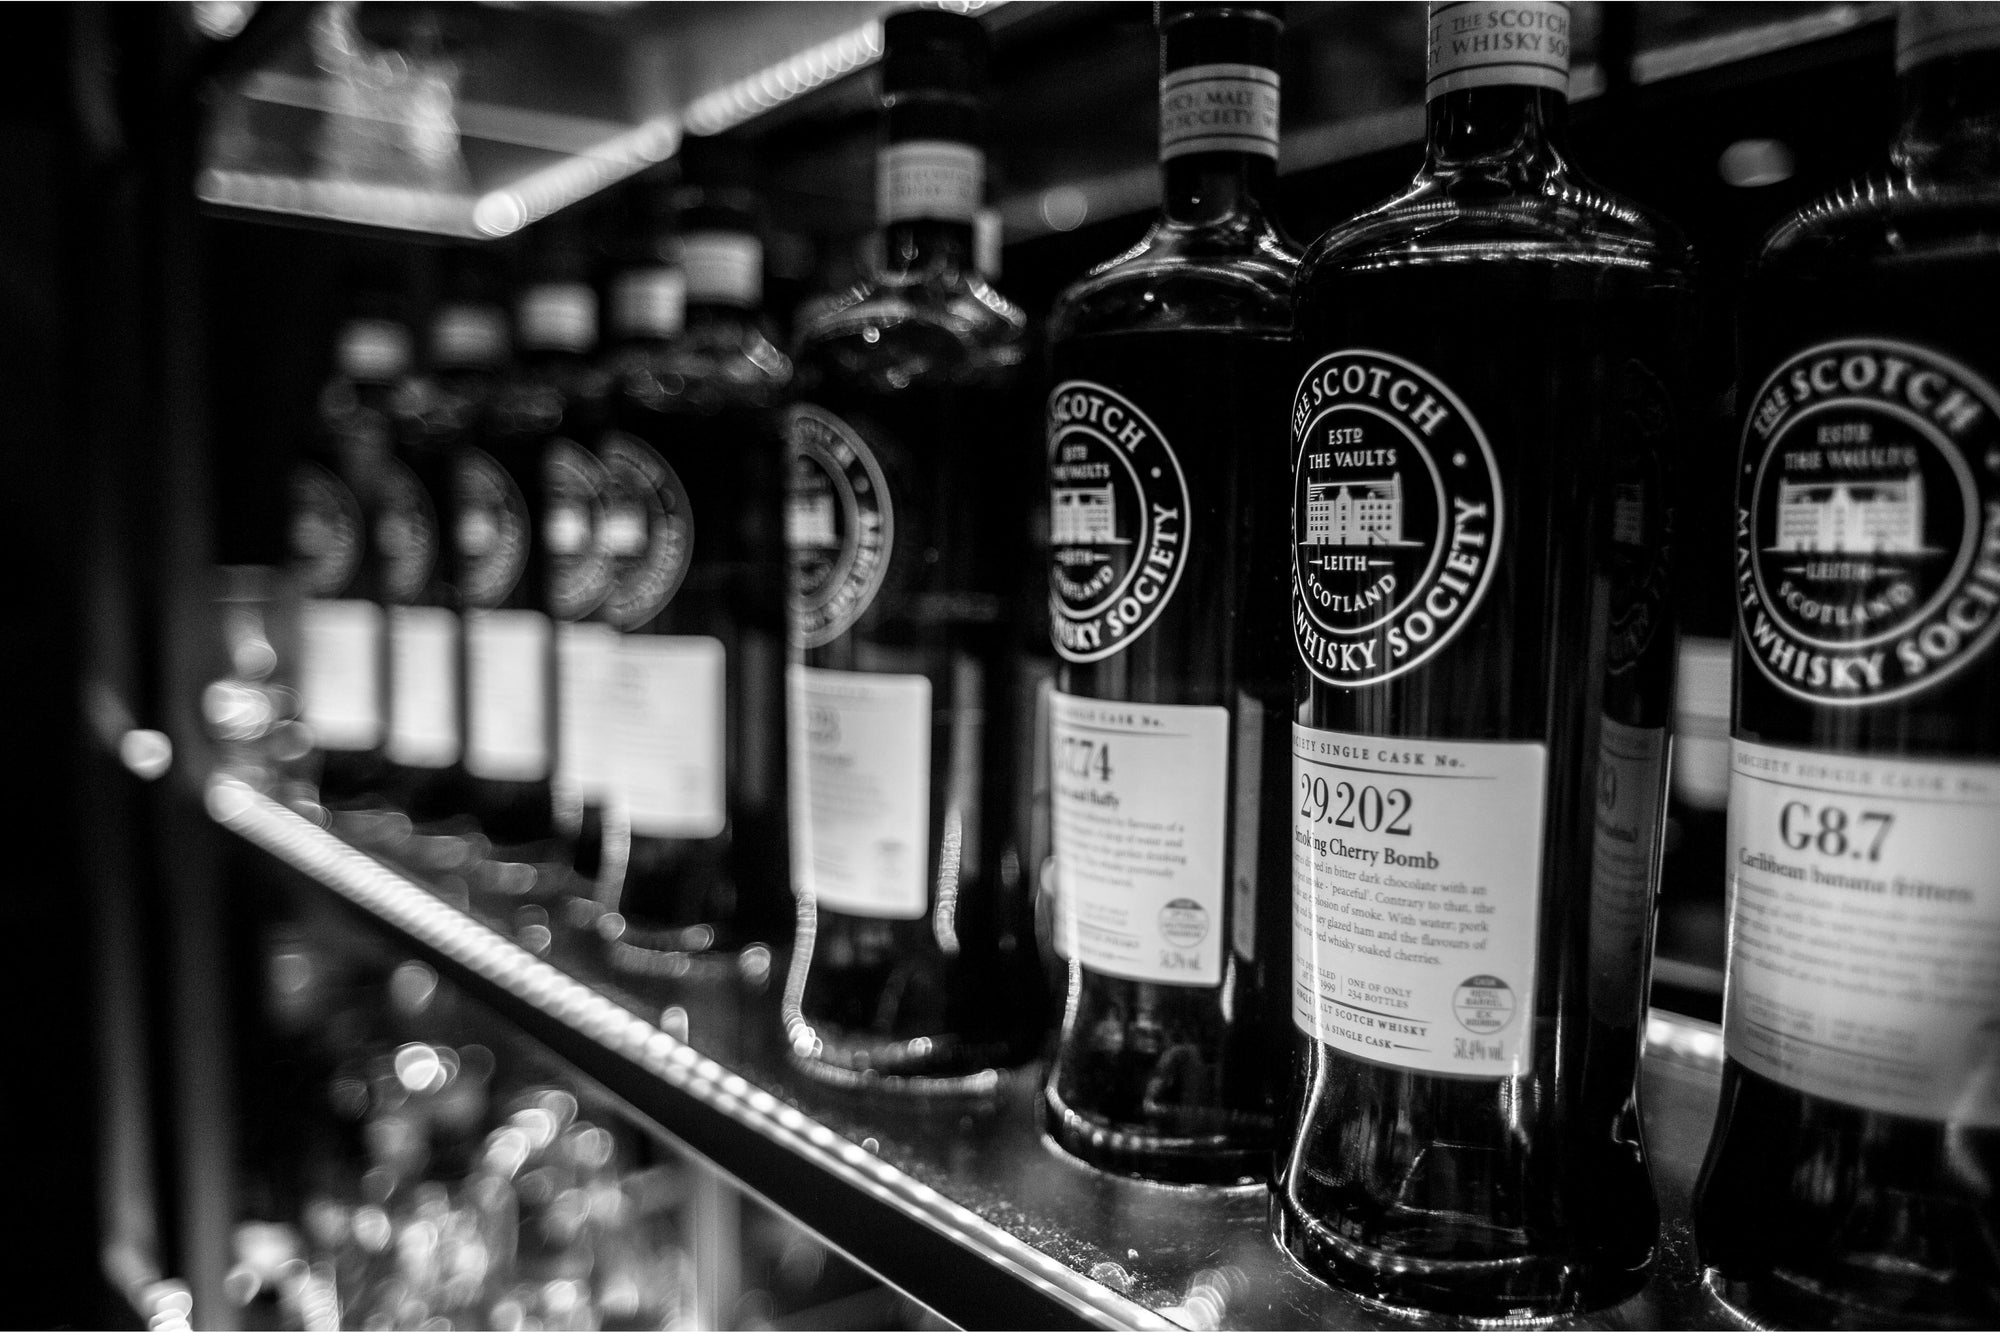 A guide to the SMWS bottling codes